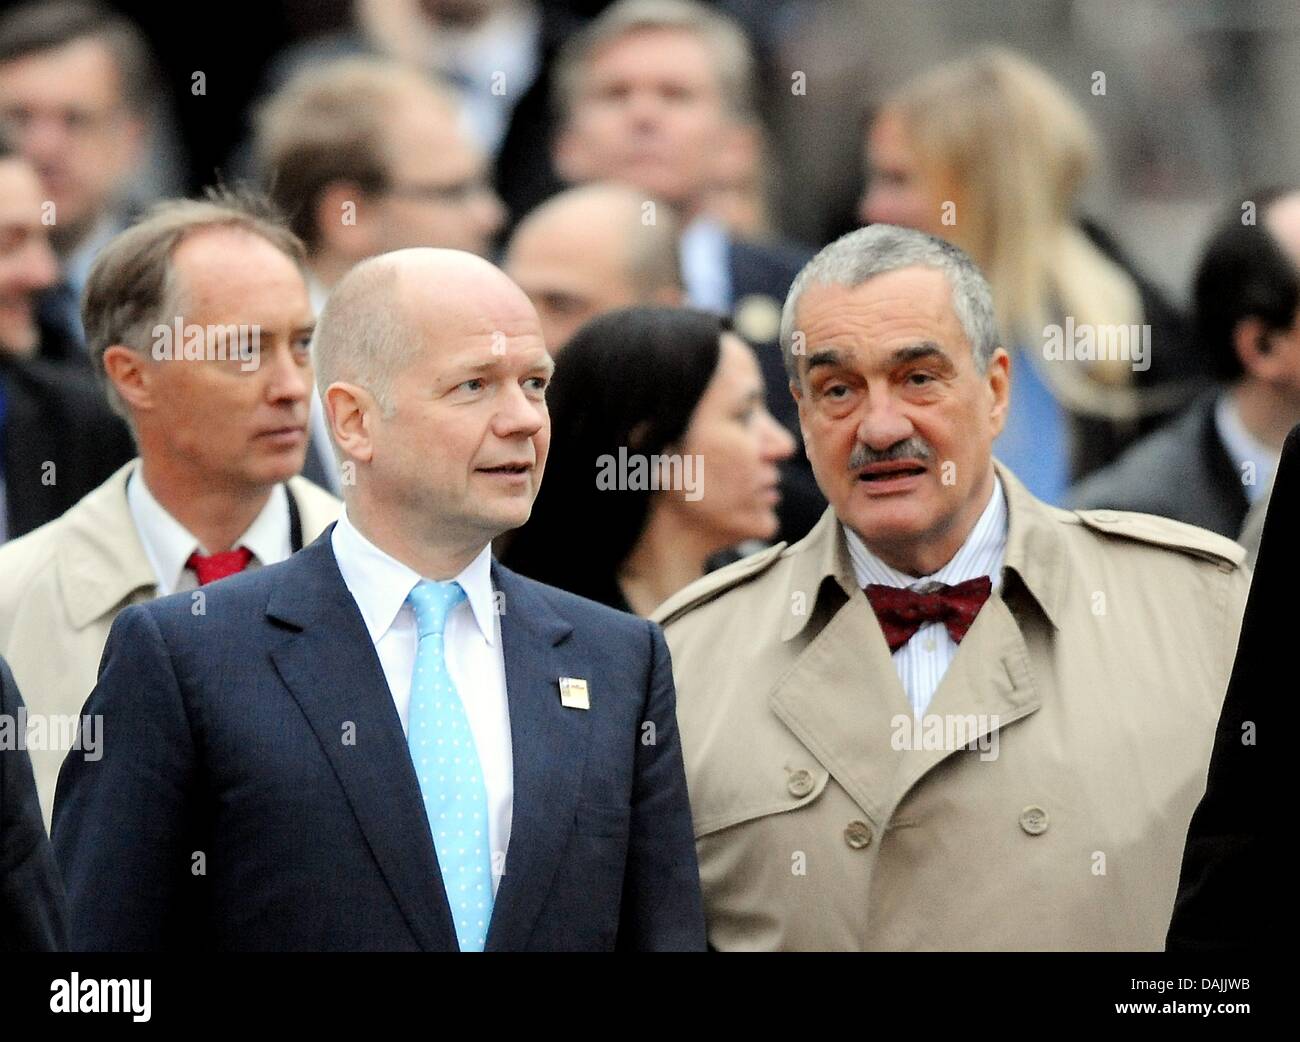 Great Britain's Foreign Minister William Hague (L) and Czech Foreign Minister Karel Schwarzenberg walk to the group photo at the Brandeburg Gate in Berlin, Germany, 14 April 2011. The foreign ministers have met for a conference of the NATO Foreign Ministers and non-NATO ISAF troop providers at the Foreign Ministry in Berlin, Germany, 14 April 2011. NATO Foreign Ministers meet in Be Stock Photo